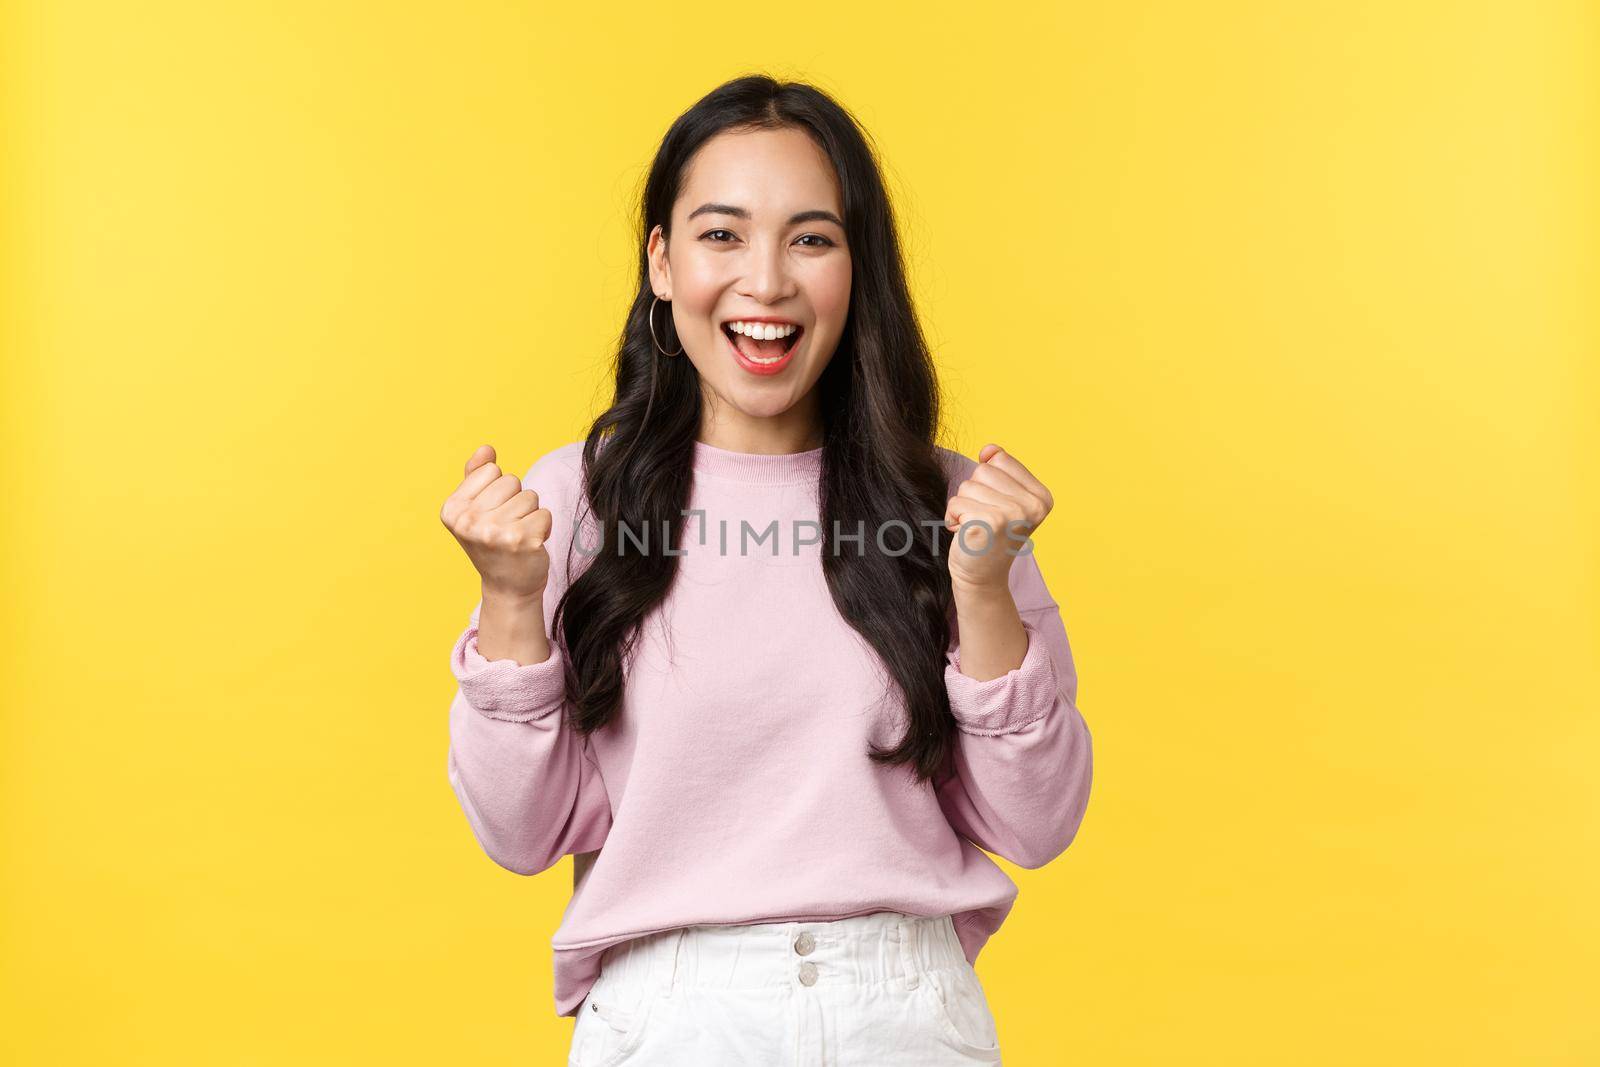 Lifestyle, emotions and advertisement concept. Cheerful and excited cute asian girl winning lottery, feel luck and upbeat, triumphing over achievement, say yes and fist pump rejoicing.